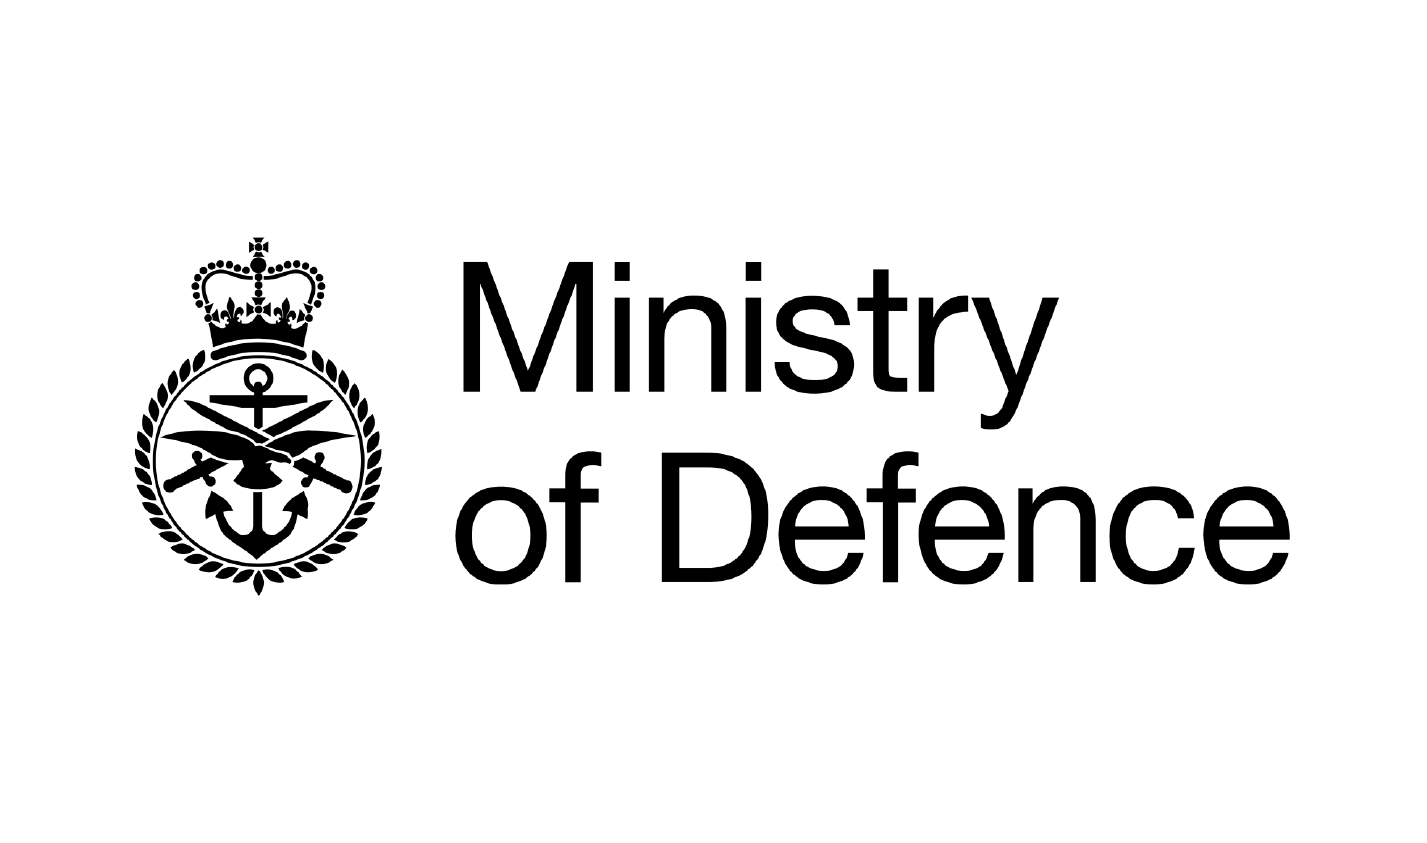 The-Ministry-Of-Defence-logo-01